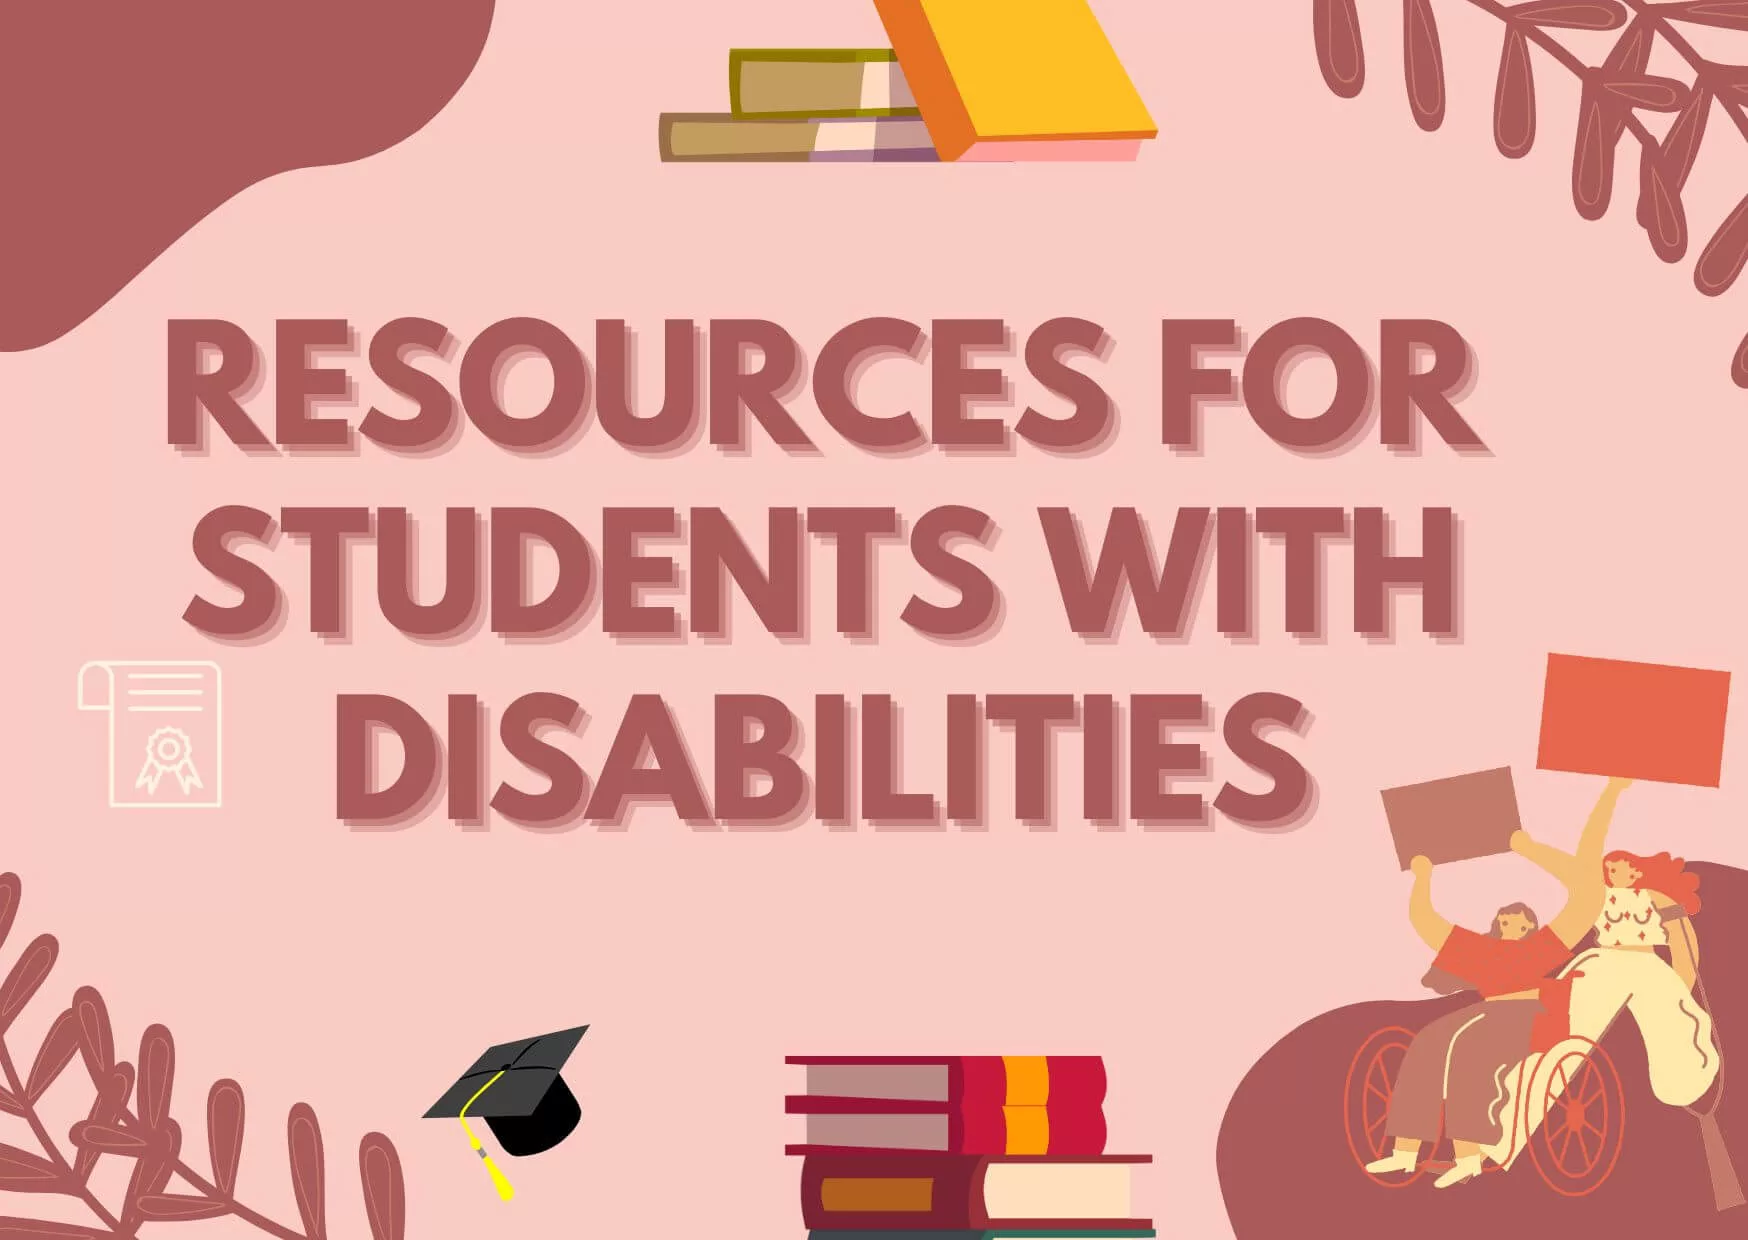 Resources for Students with Disabilities